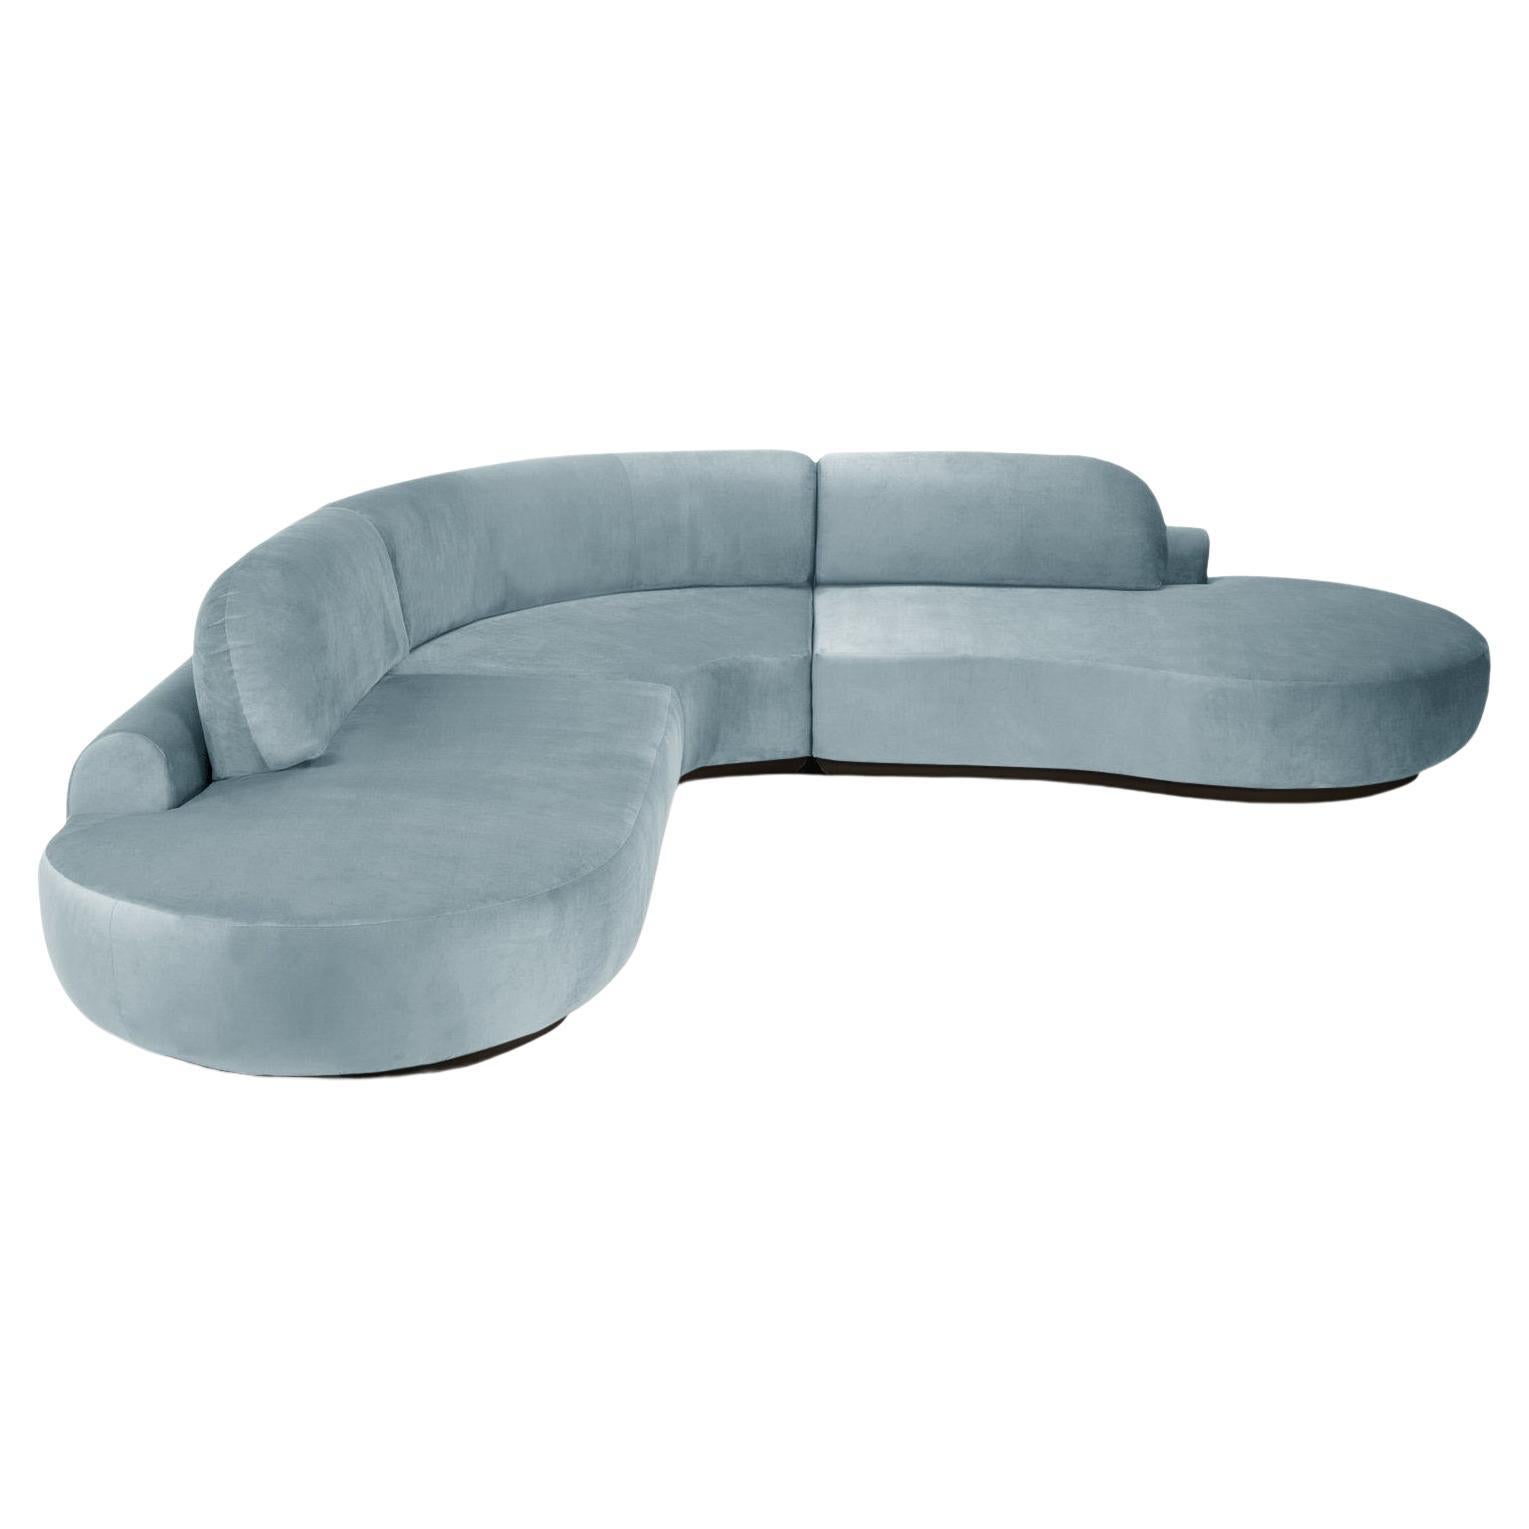 Naked Curved Sectional Sofa, 3 Piece with Beech Ash-056-5 and Paris Safira For Sale